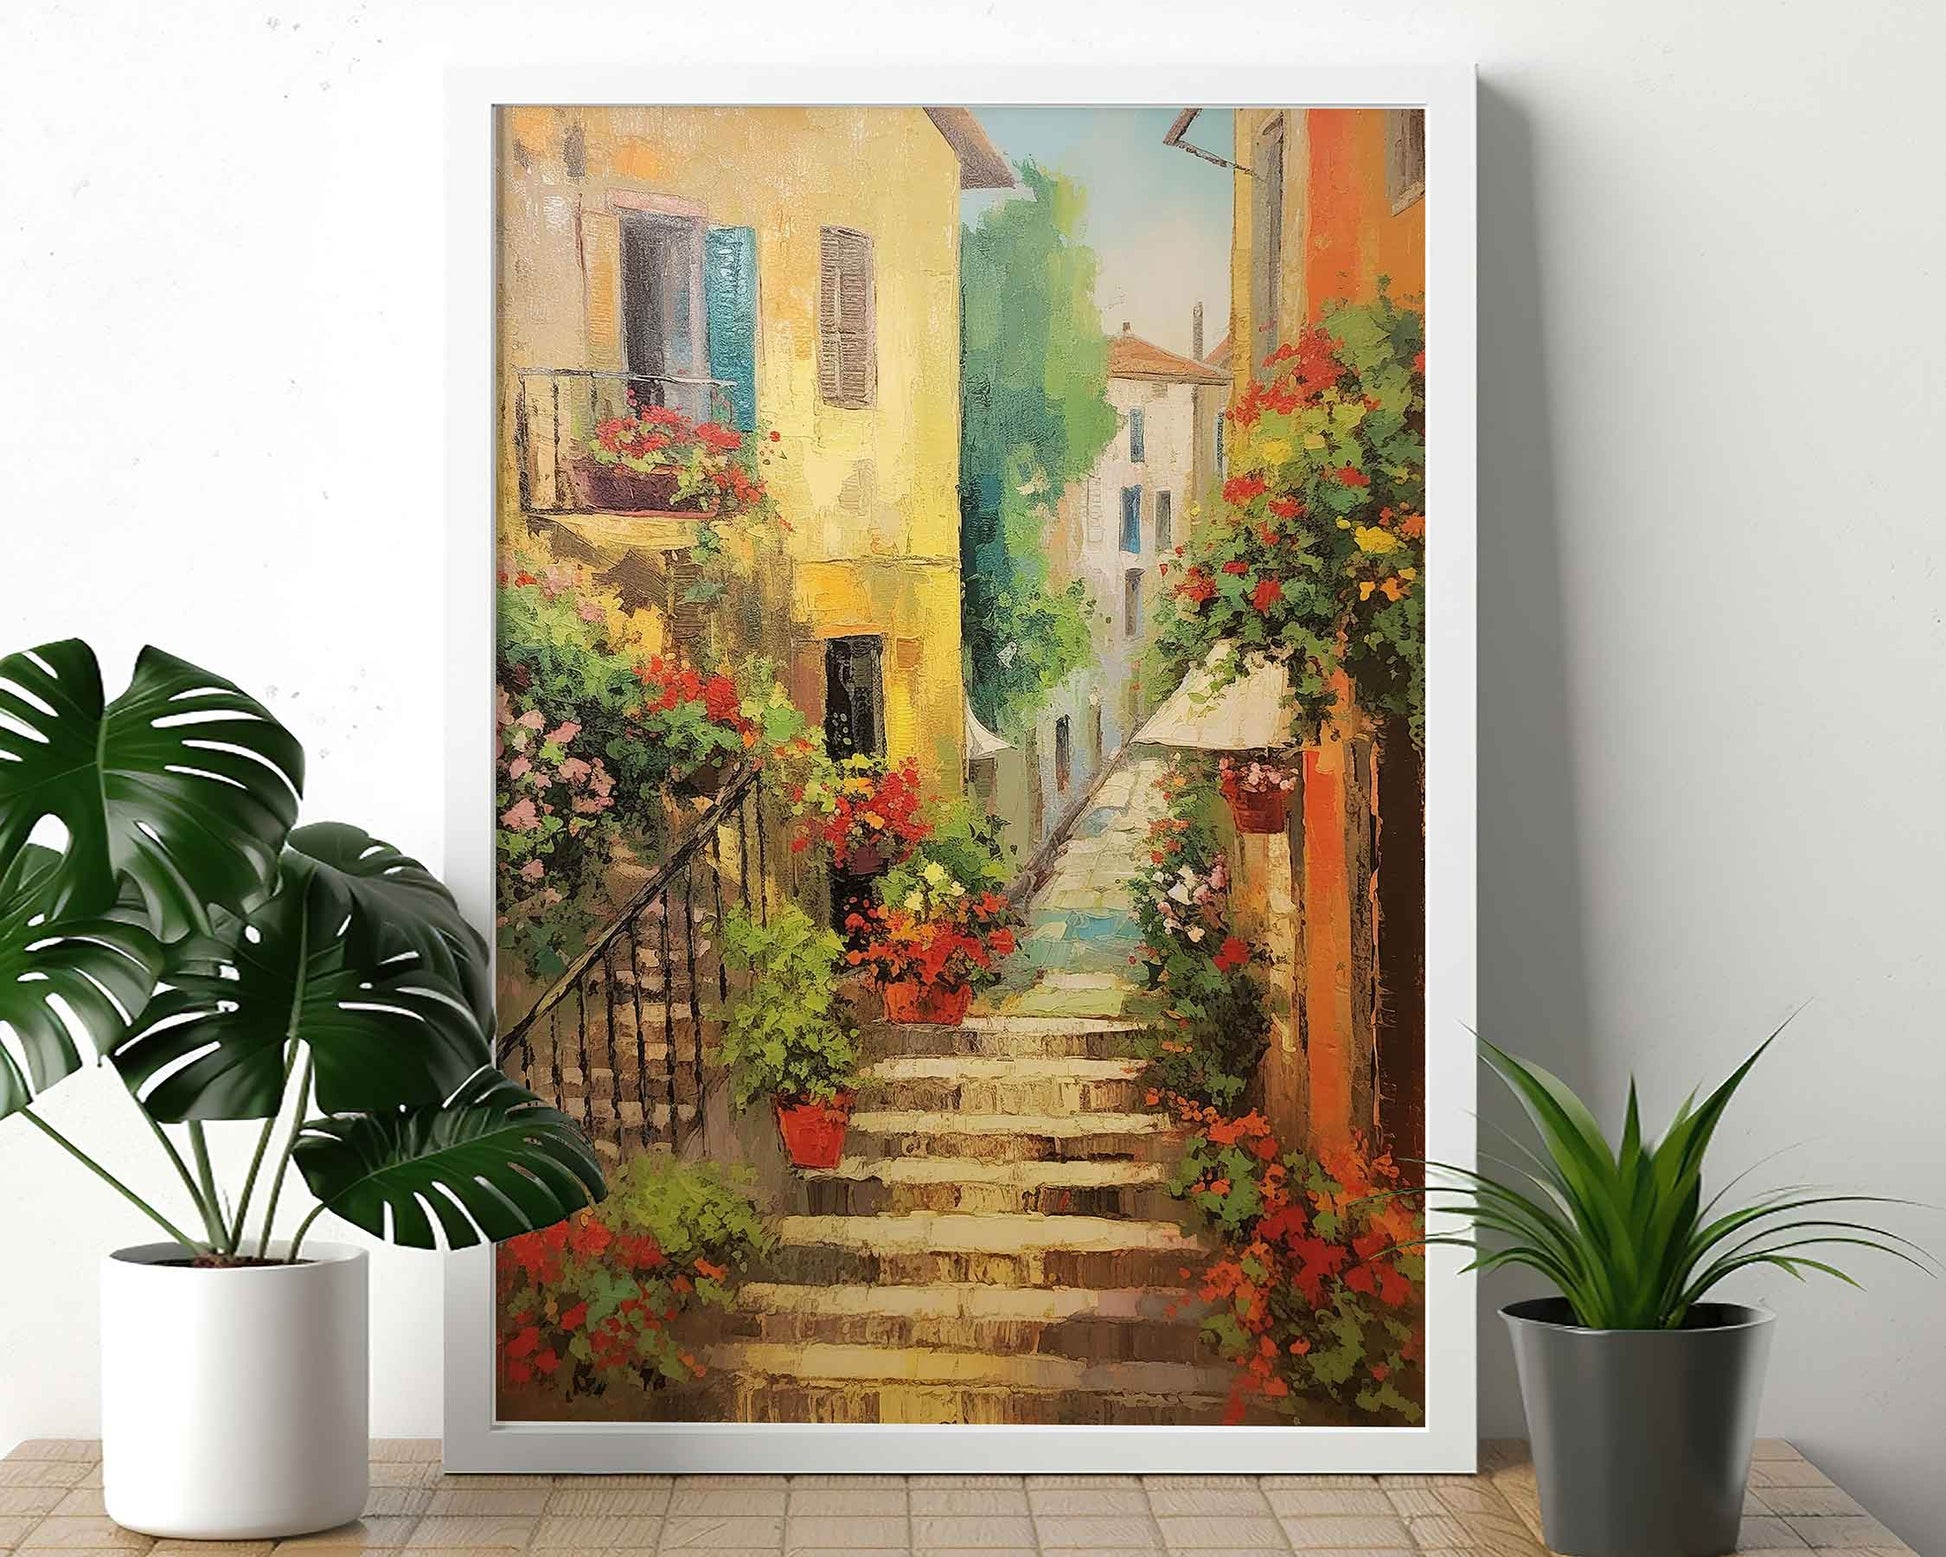 Framed Image of Italian Scenic Landscapes & Lifestyle Travel Wall Art Prints of Italy